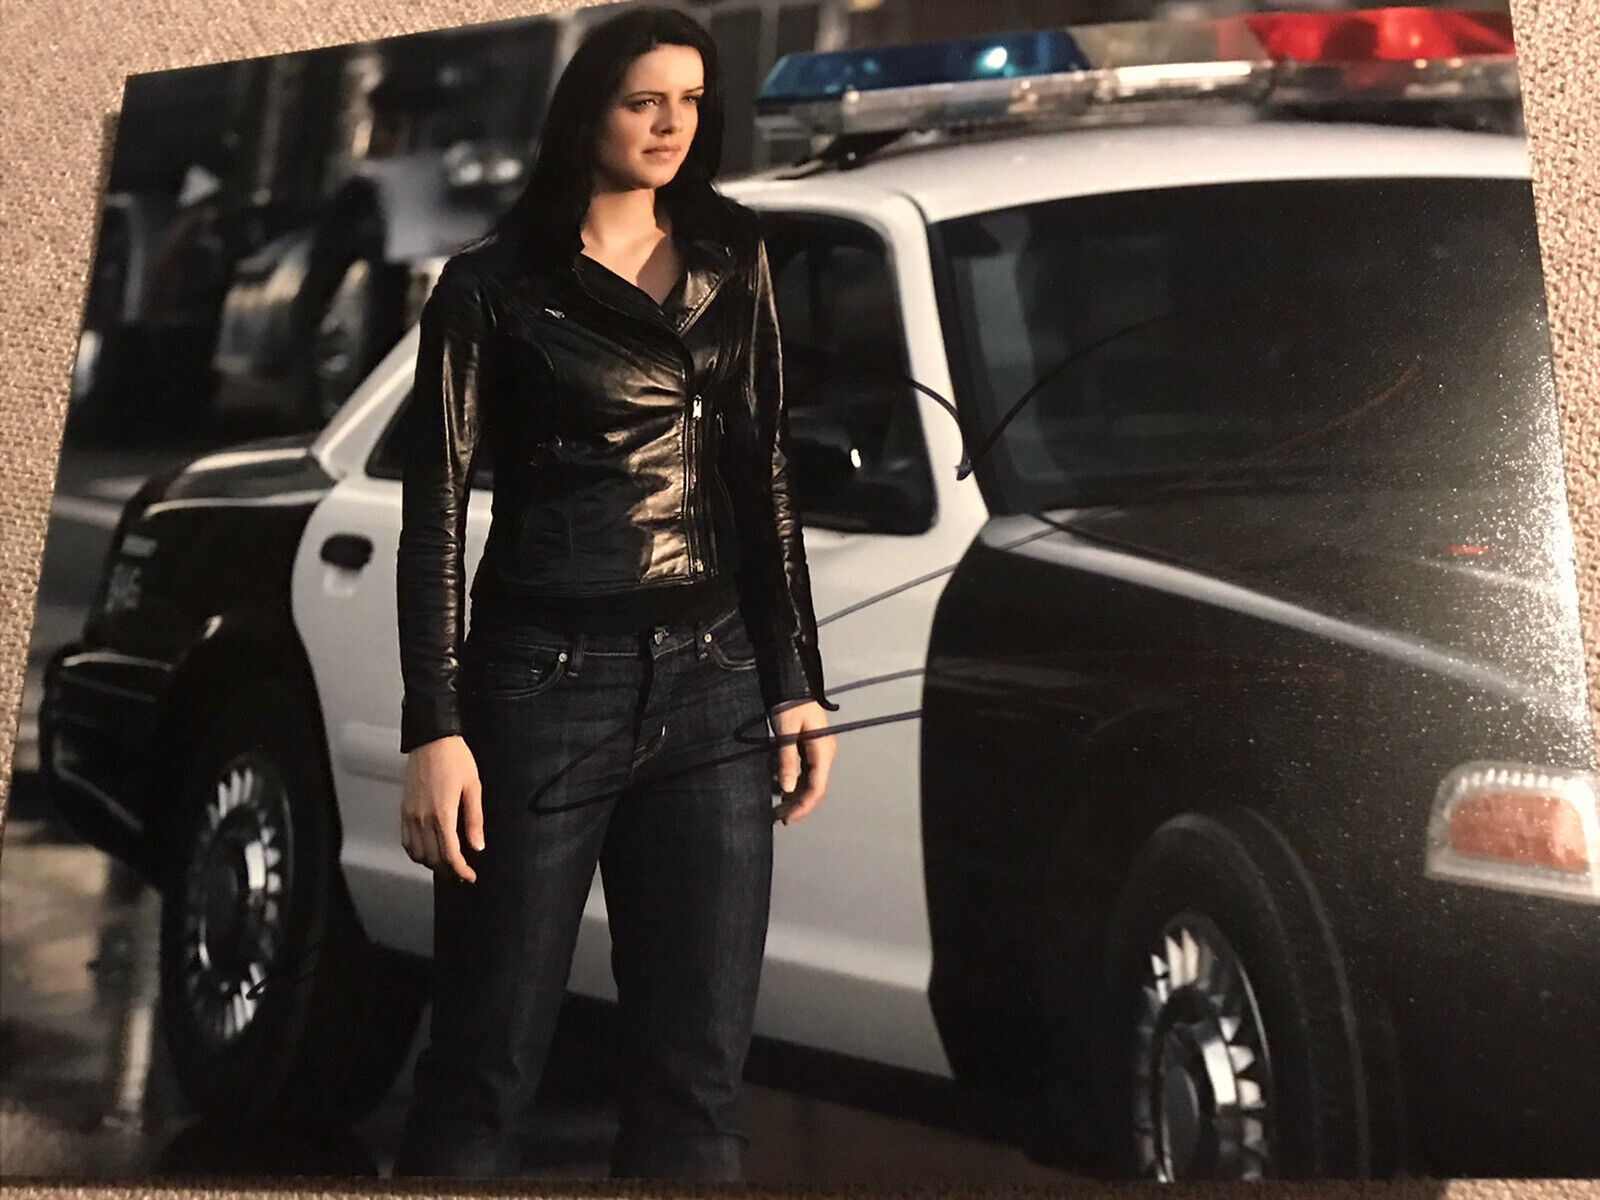 Bionic Woman - MICHELLE RYAN personally signed picture 8 x 10”